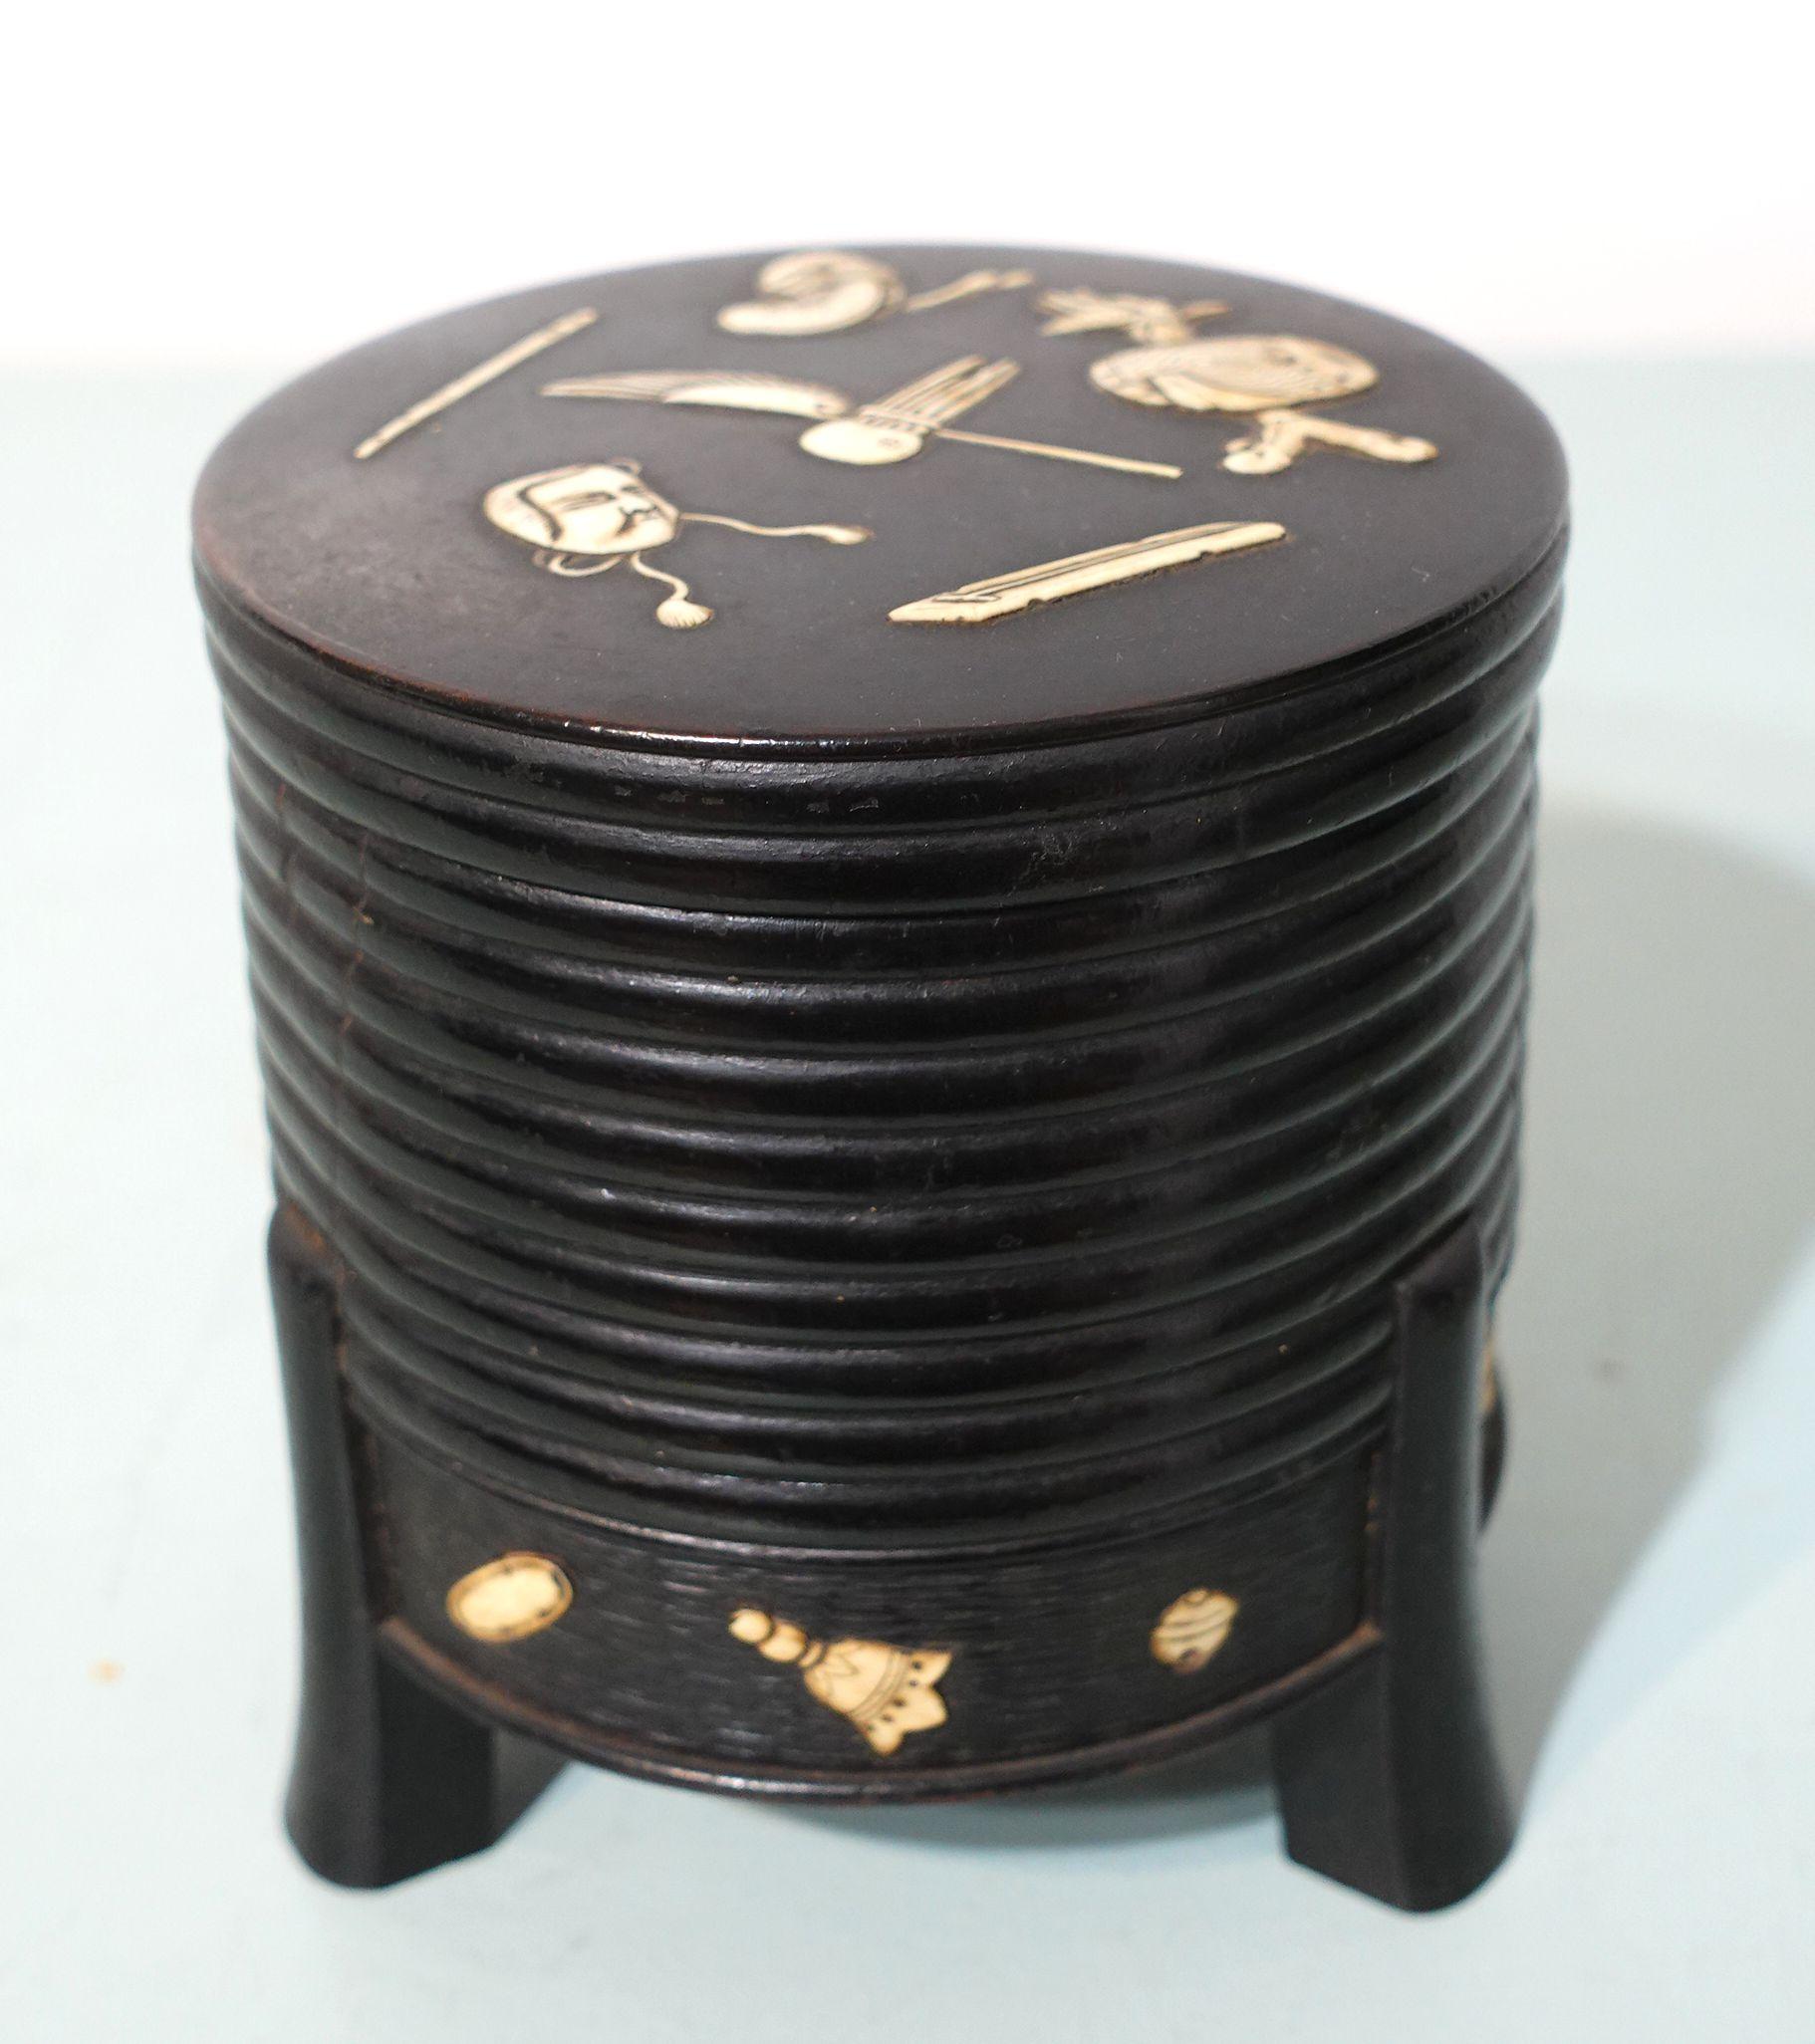 A Meiji period a miniature carved ebony hokkai decorated with lots of inlaid elements on the lower band and on the fitted lid and resting on three feet. one small inlay object missing see photo #6, lower right corner.